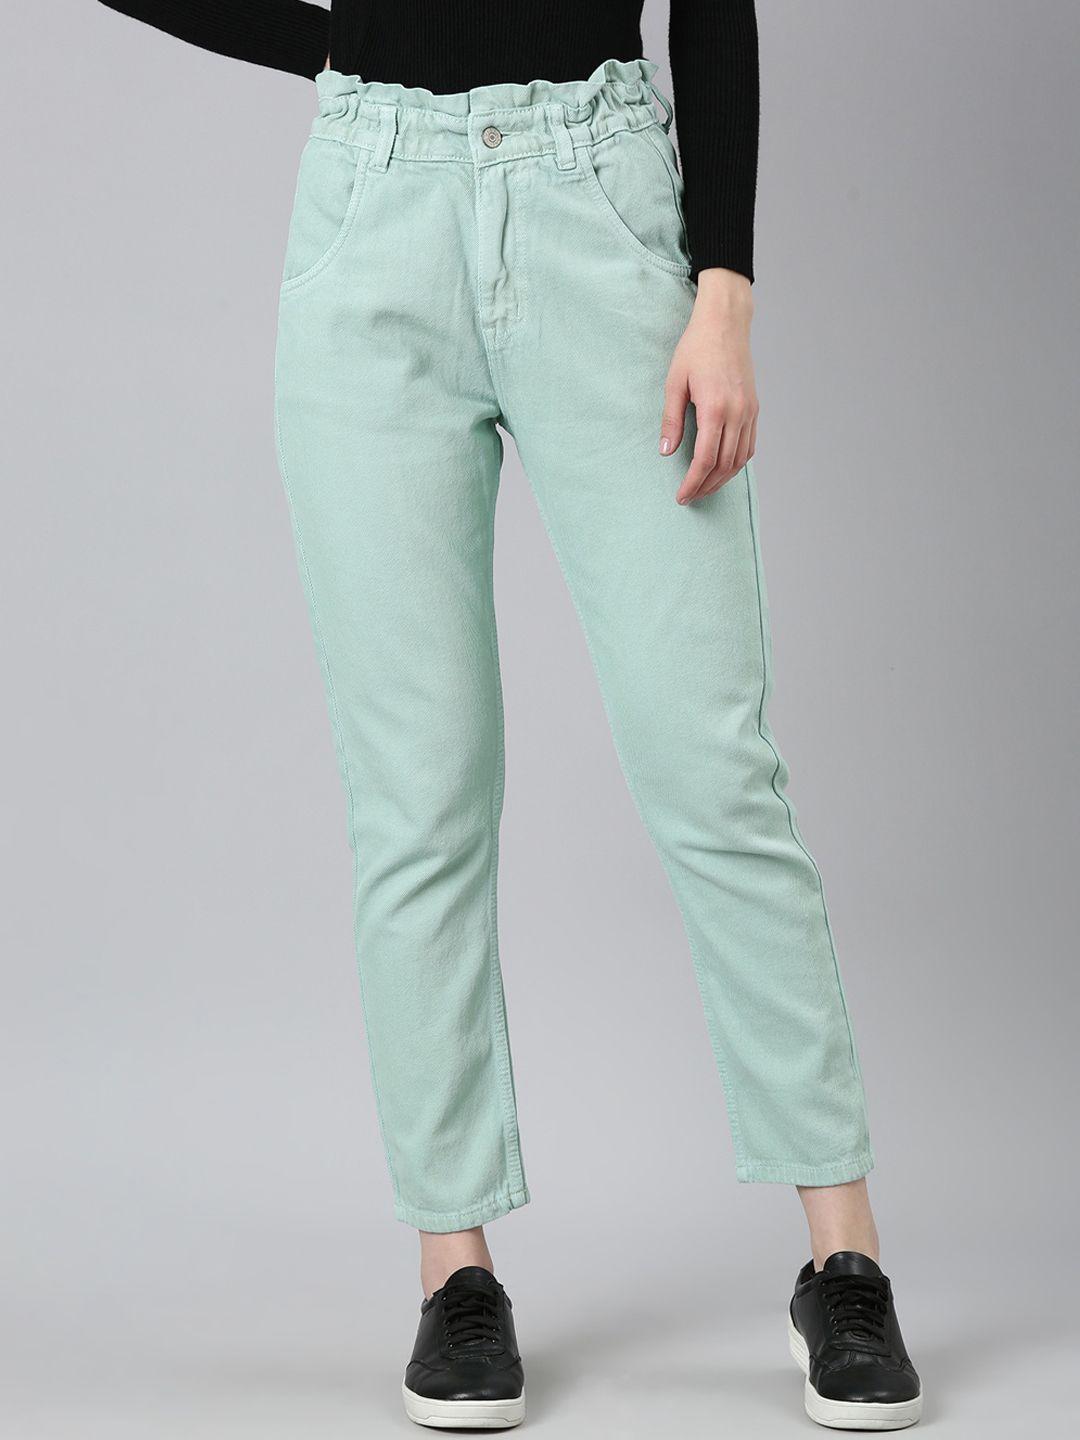 showoff-women-high-rise-cotton-jeans